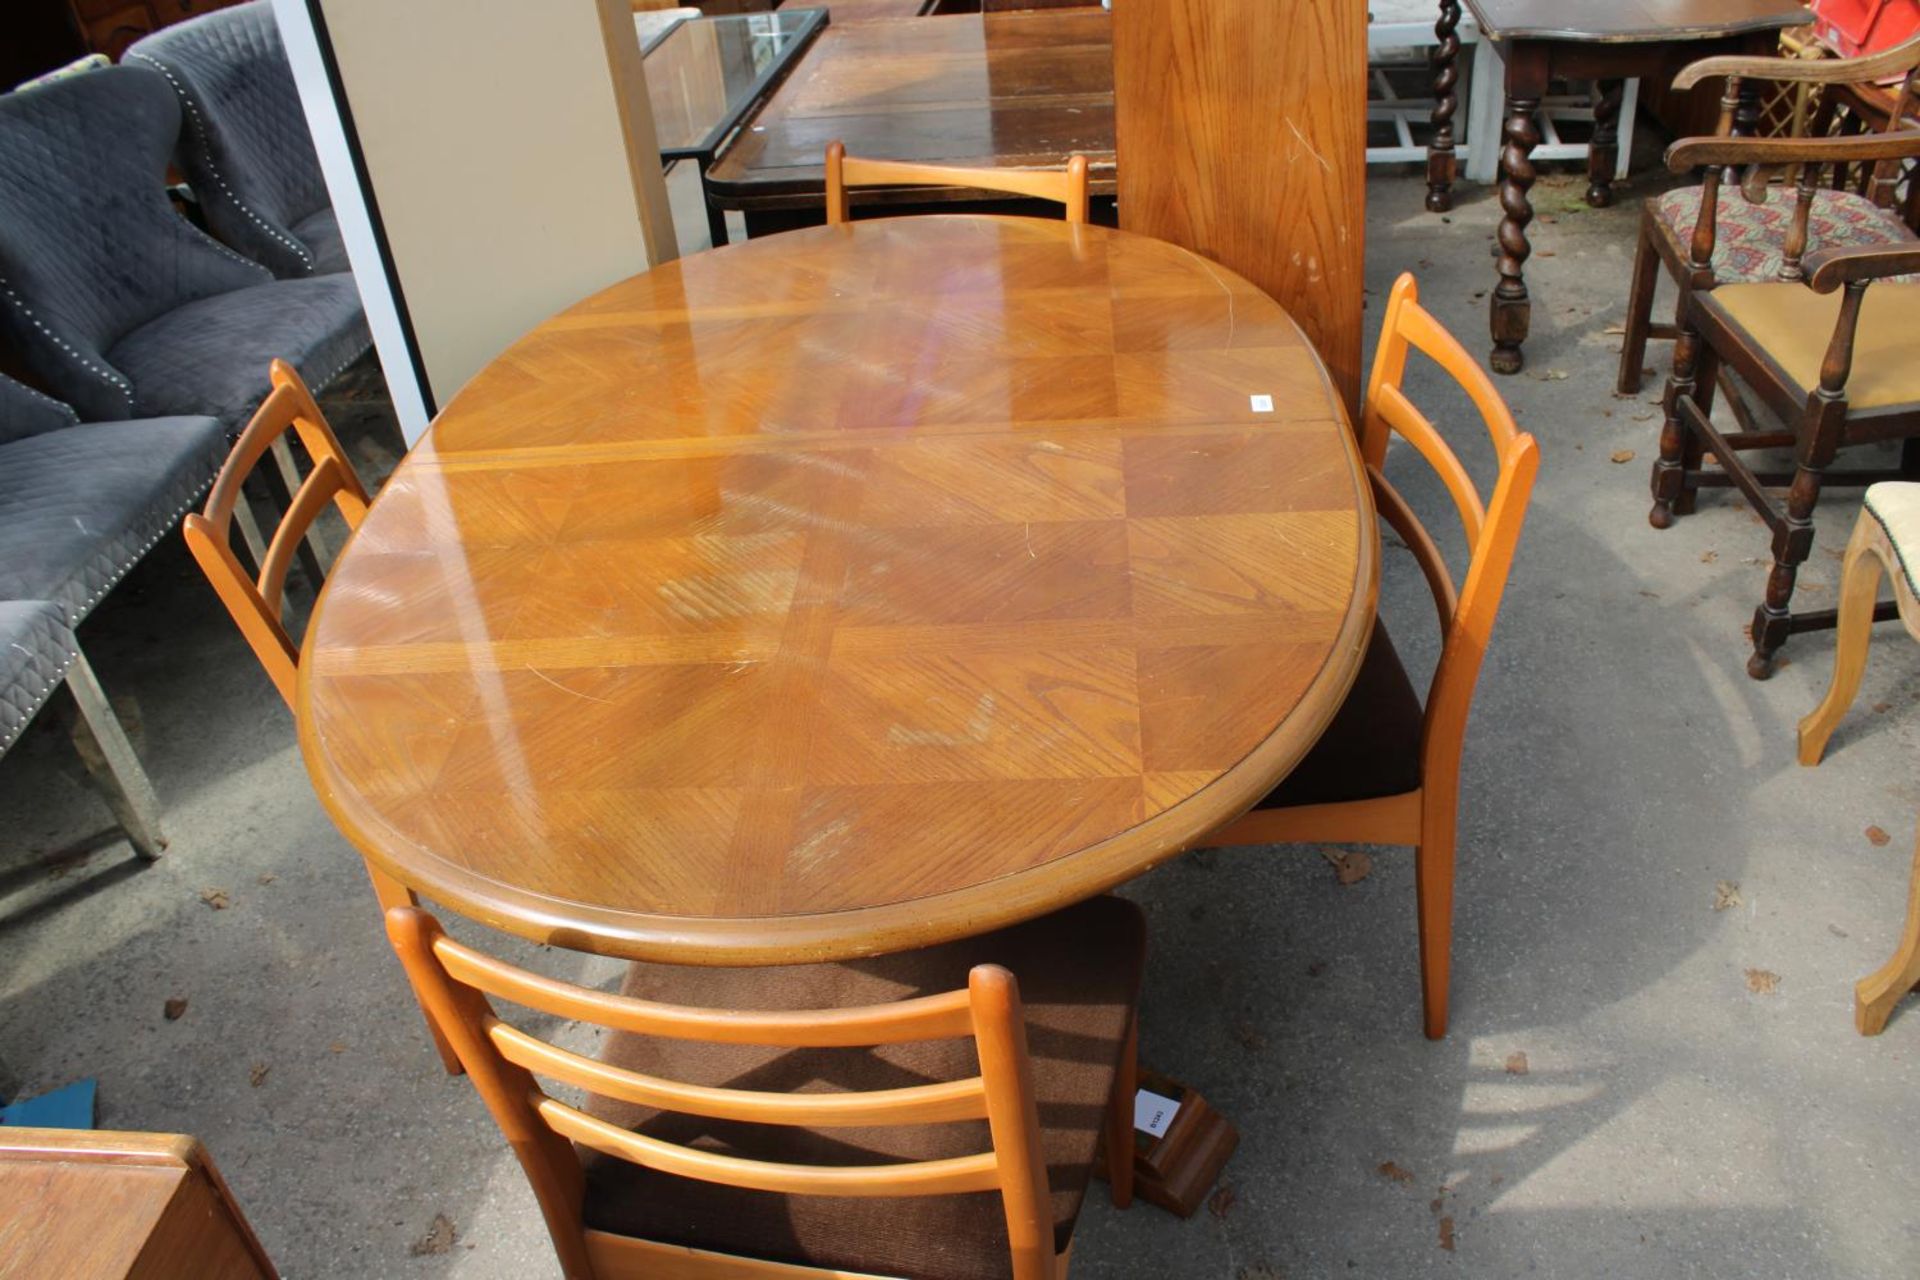 A MODERN TWIN-PEDESTAL EXTENDING DINING TABLE, 56" X 41" (LEAF 15") AND 4 SCHREIBER DINING CHAIRS - Image 2 of 4